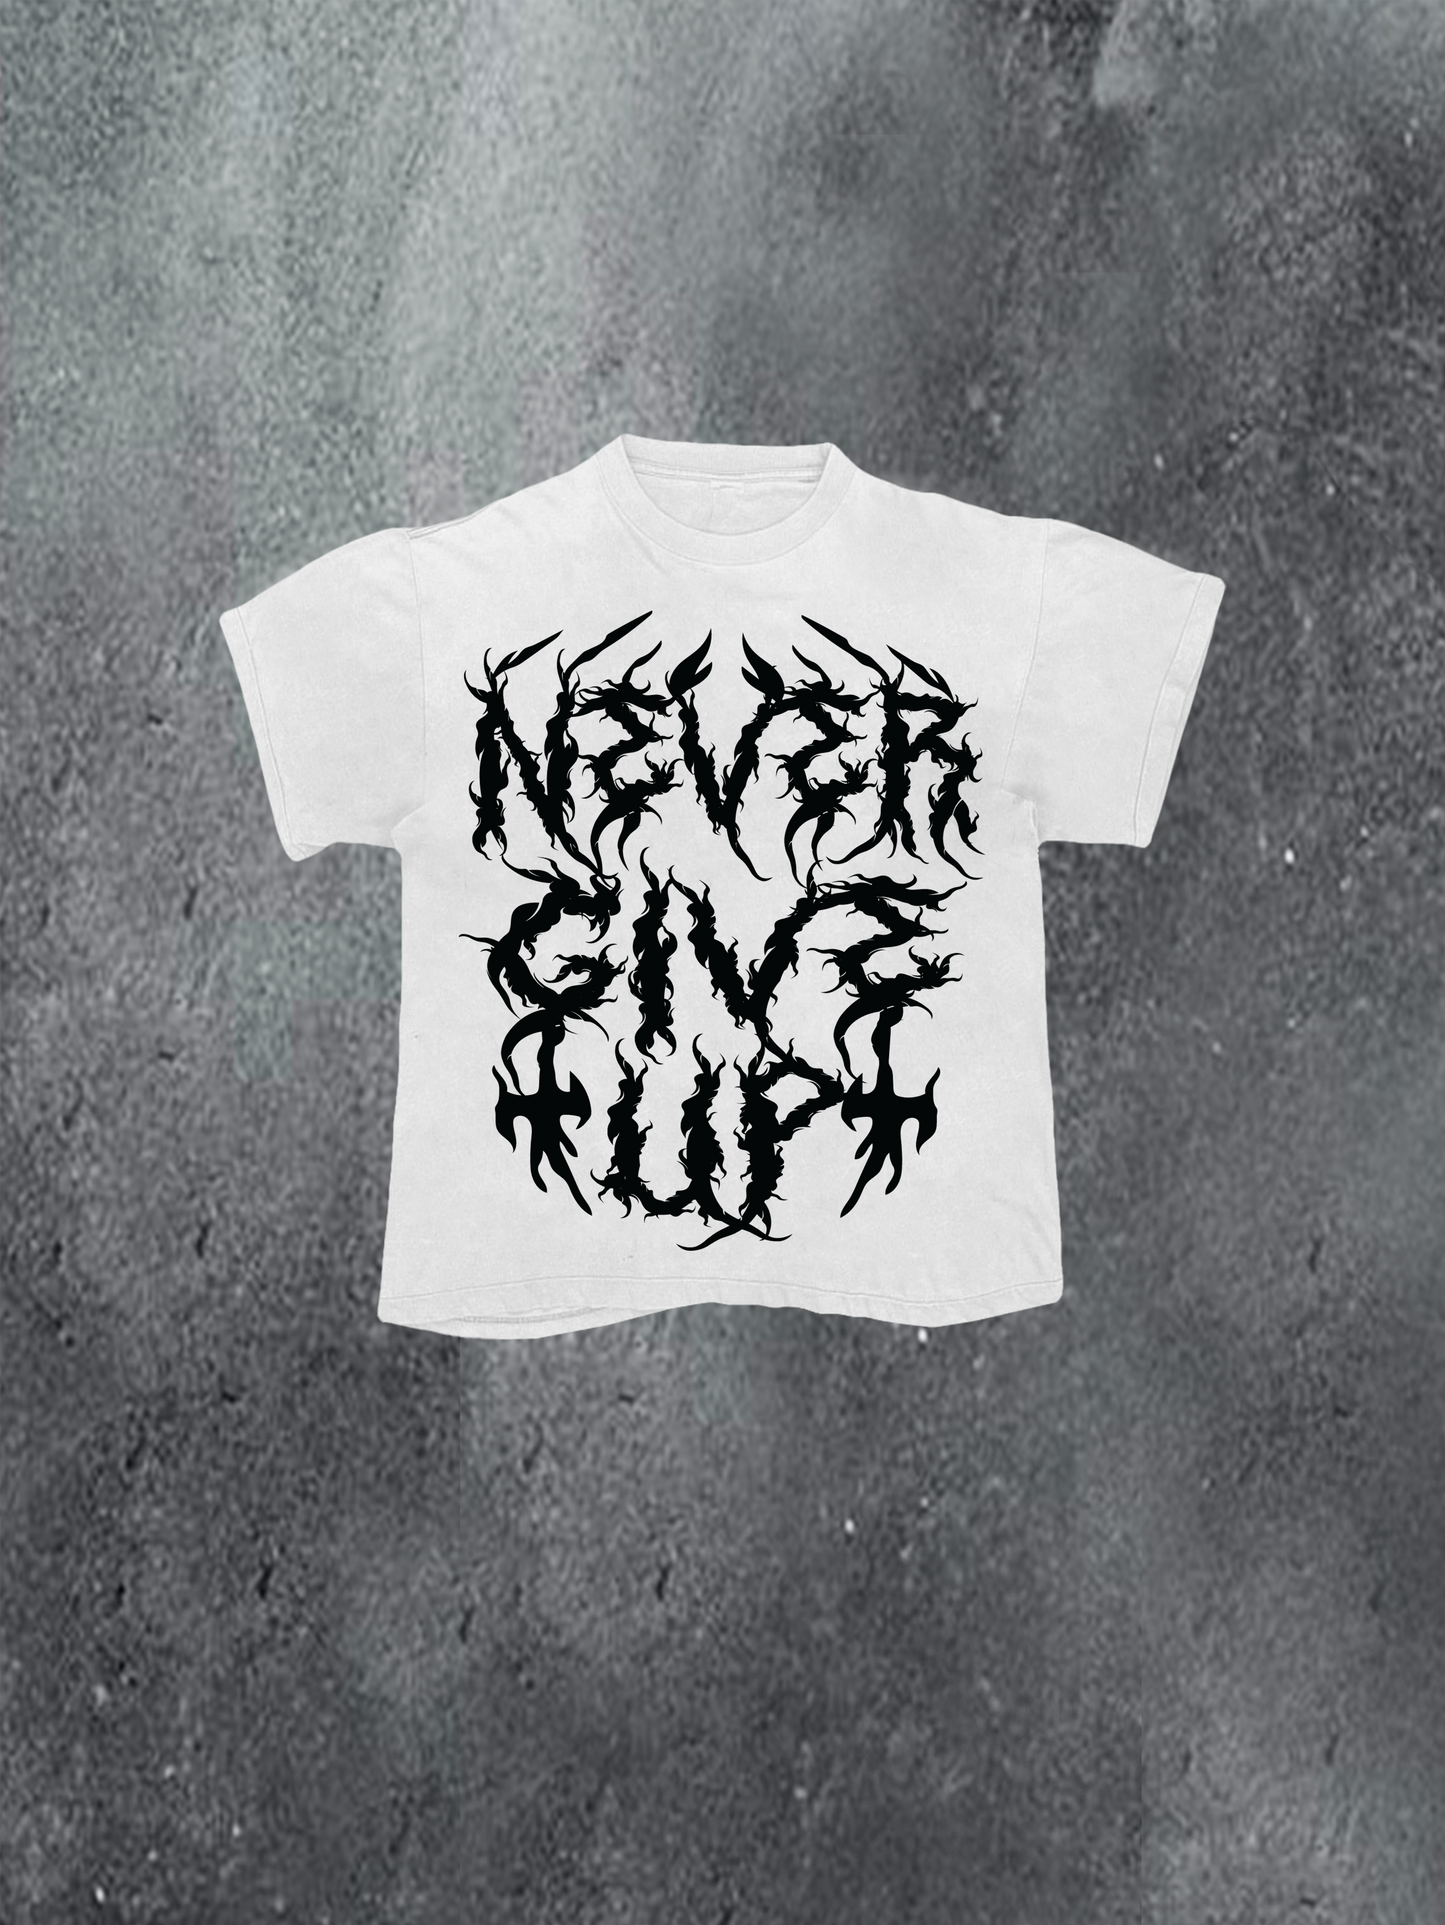 Never Give Up Tee